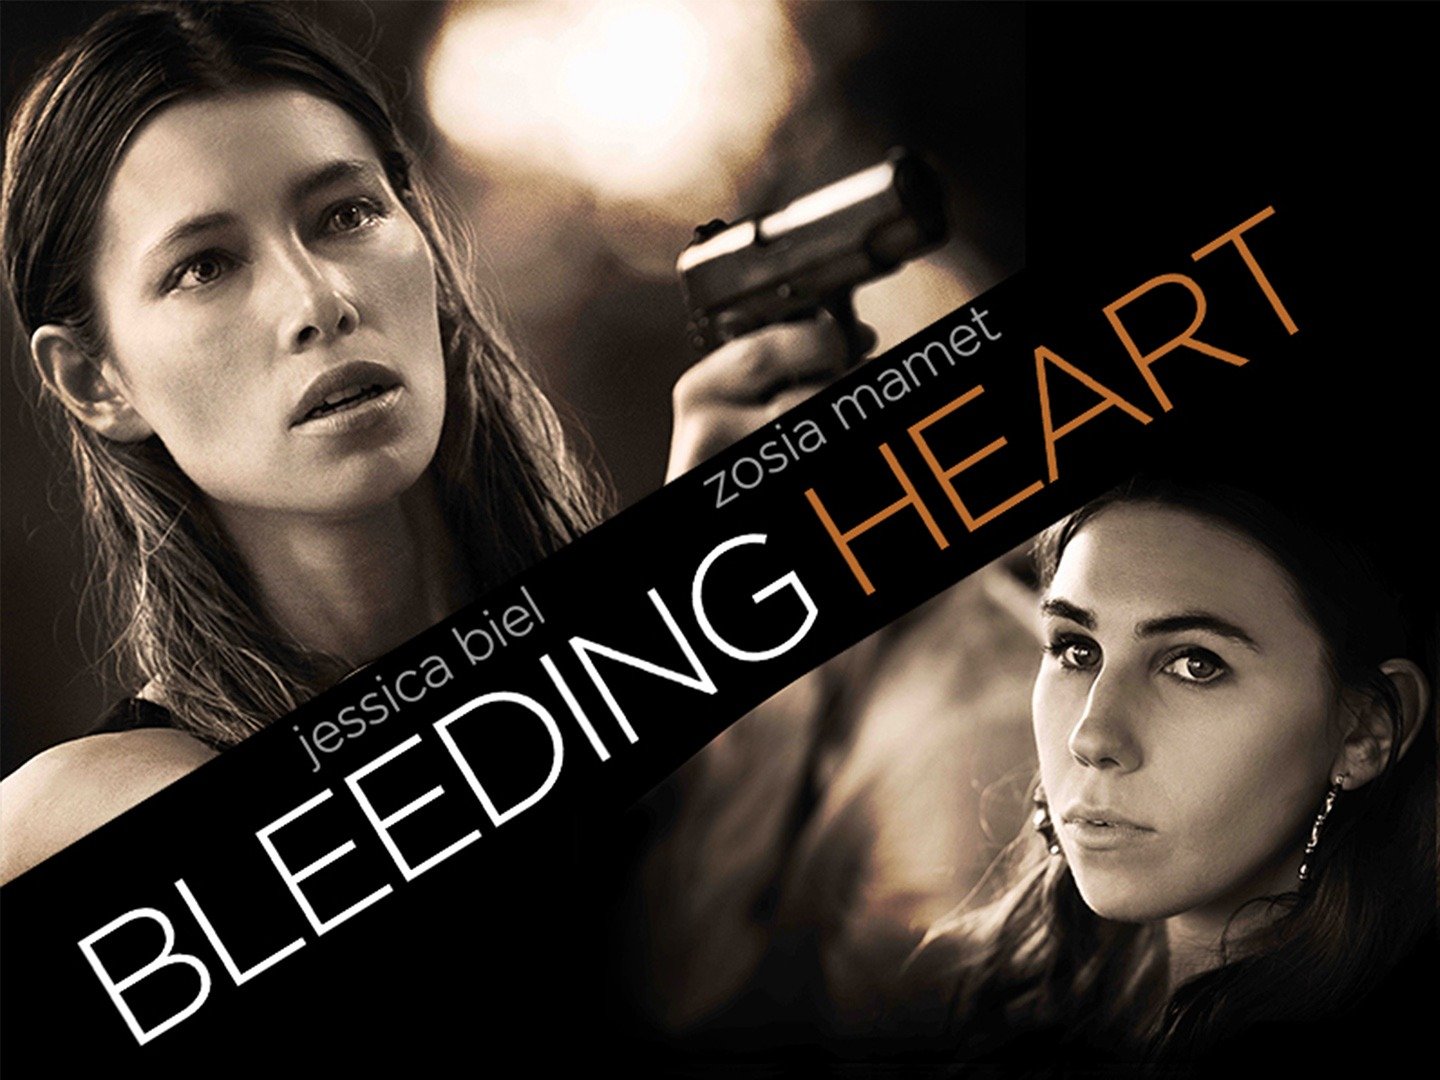 Bleeding Heart Trailer 1 Trailers And Videos Rotten Tomatoes